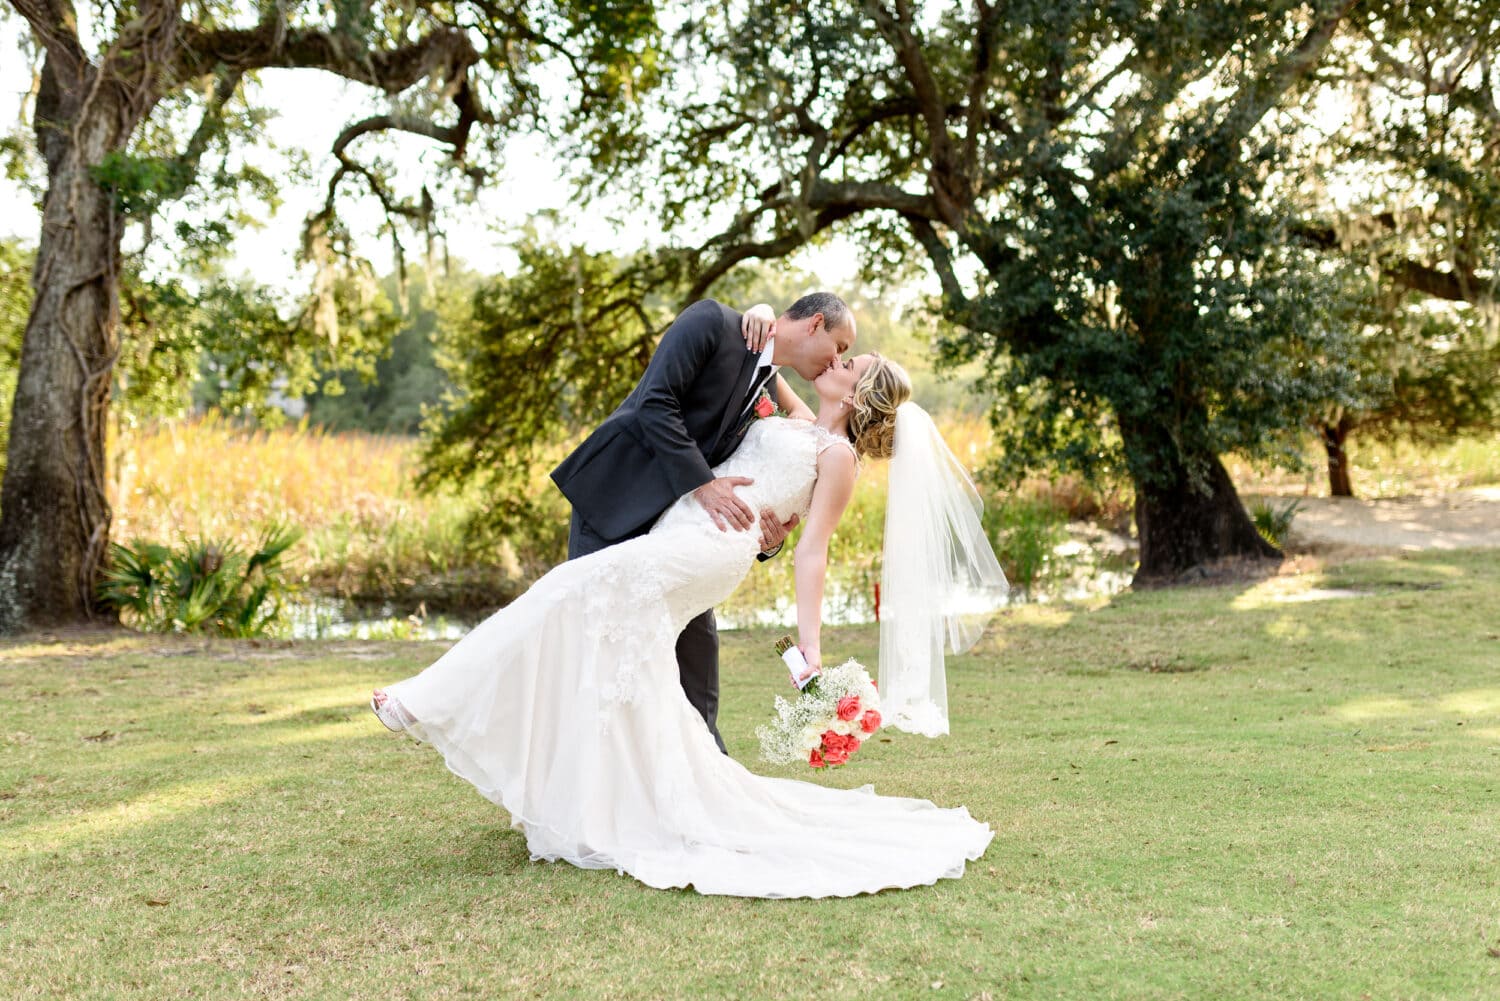 Kiss under the Oak Trees on the golf course 35mm f/2 - Pawleys Plantation